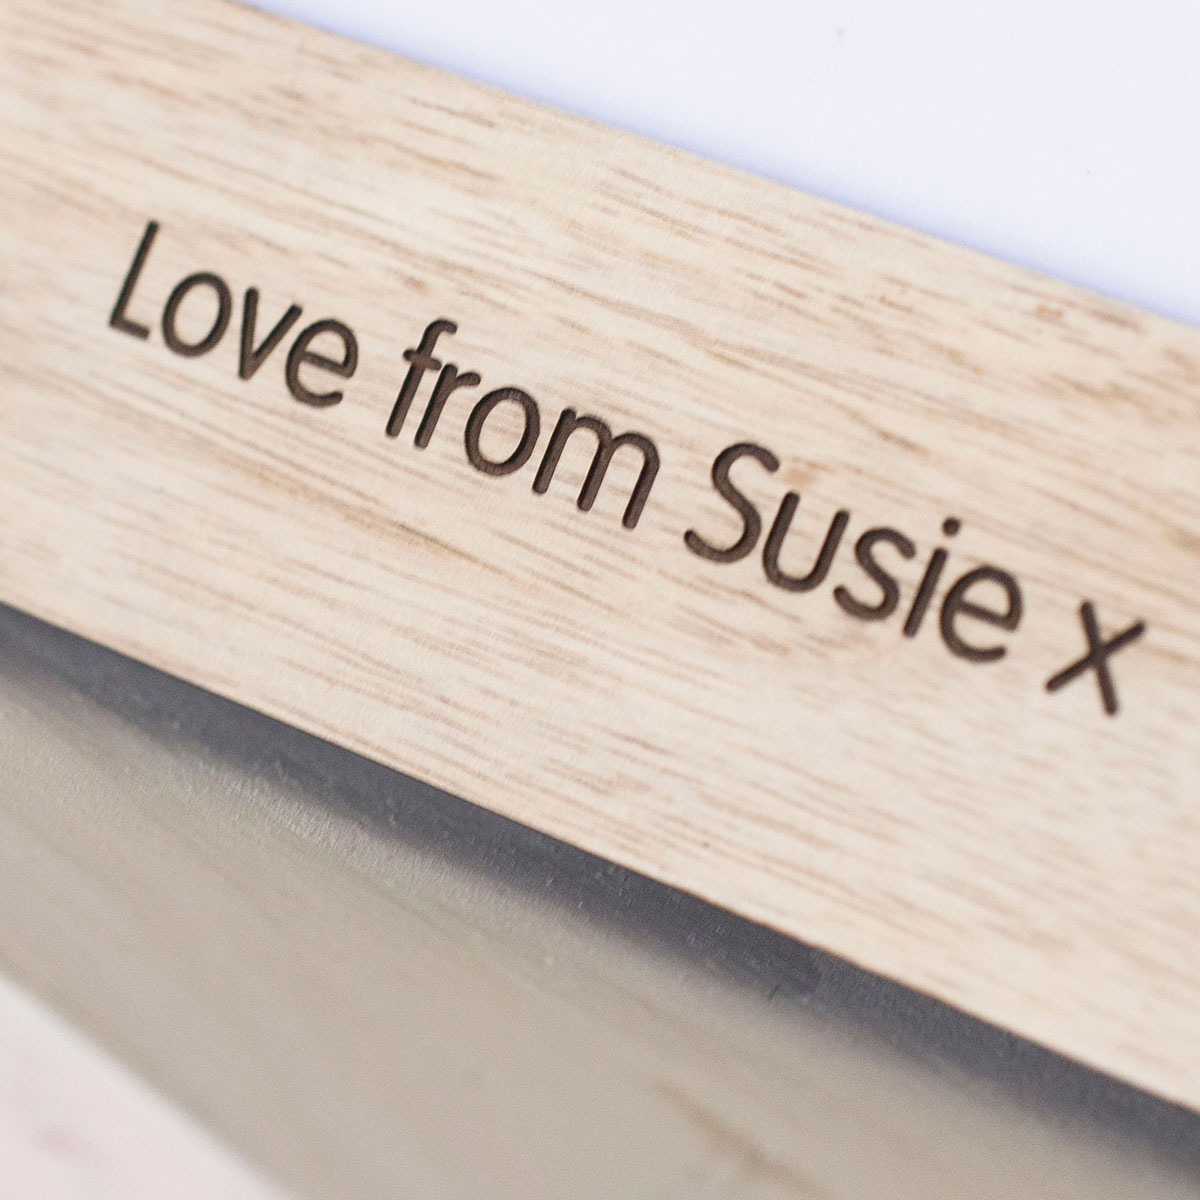 Personalised Engraved Wooden Photo Frame - 1st Father's Day